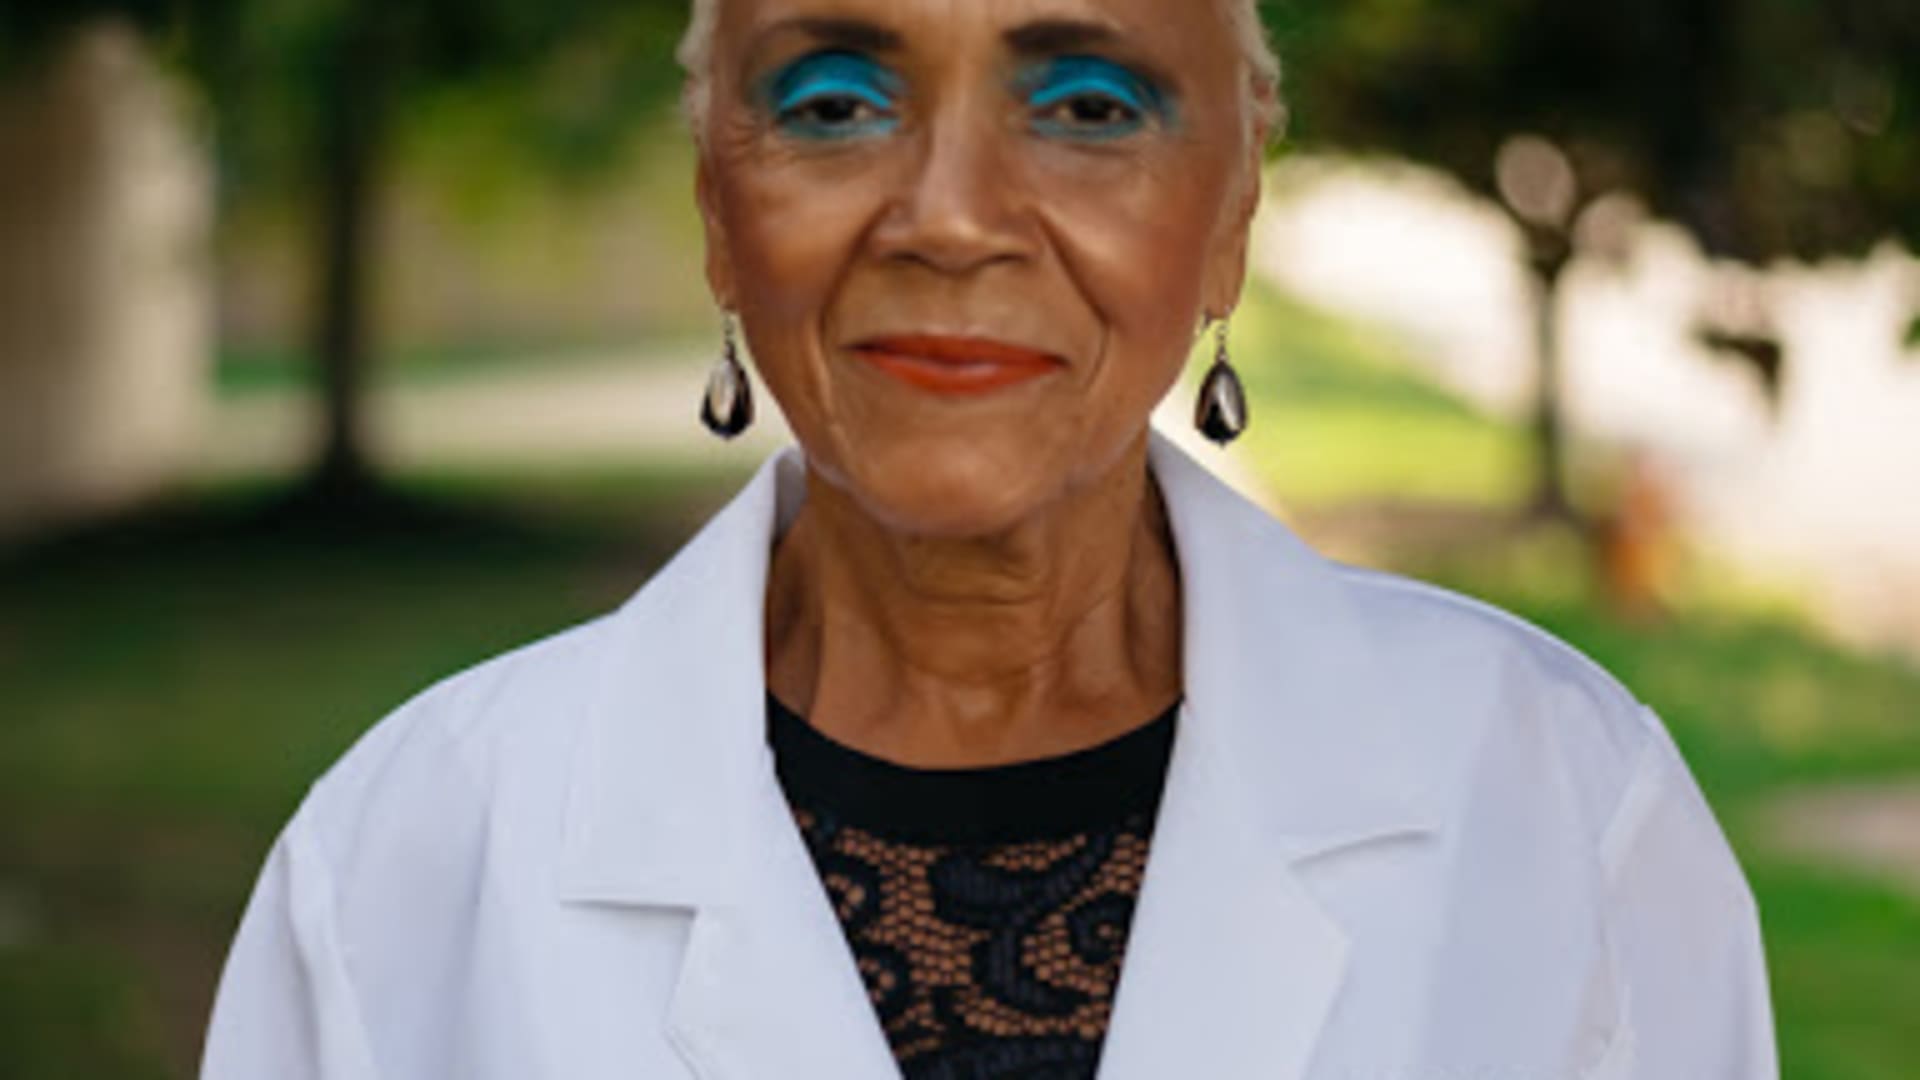 Dr. Virginia Banks, an infectious disease specialist, is part of a group of Black physicians and scientists who are focused on ways to solve health-care disparities.